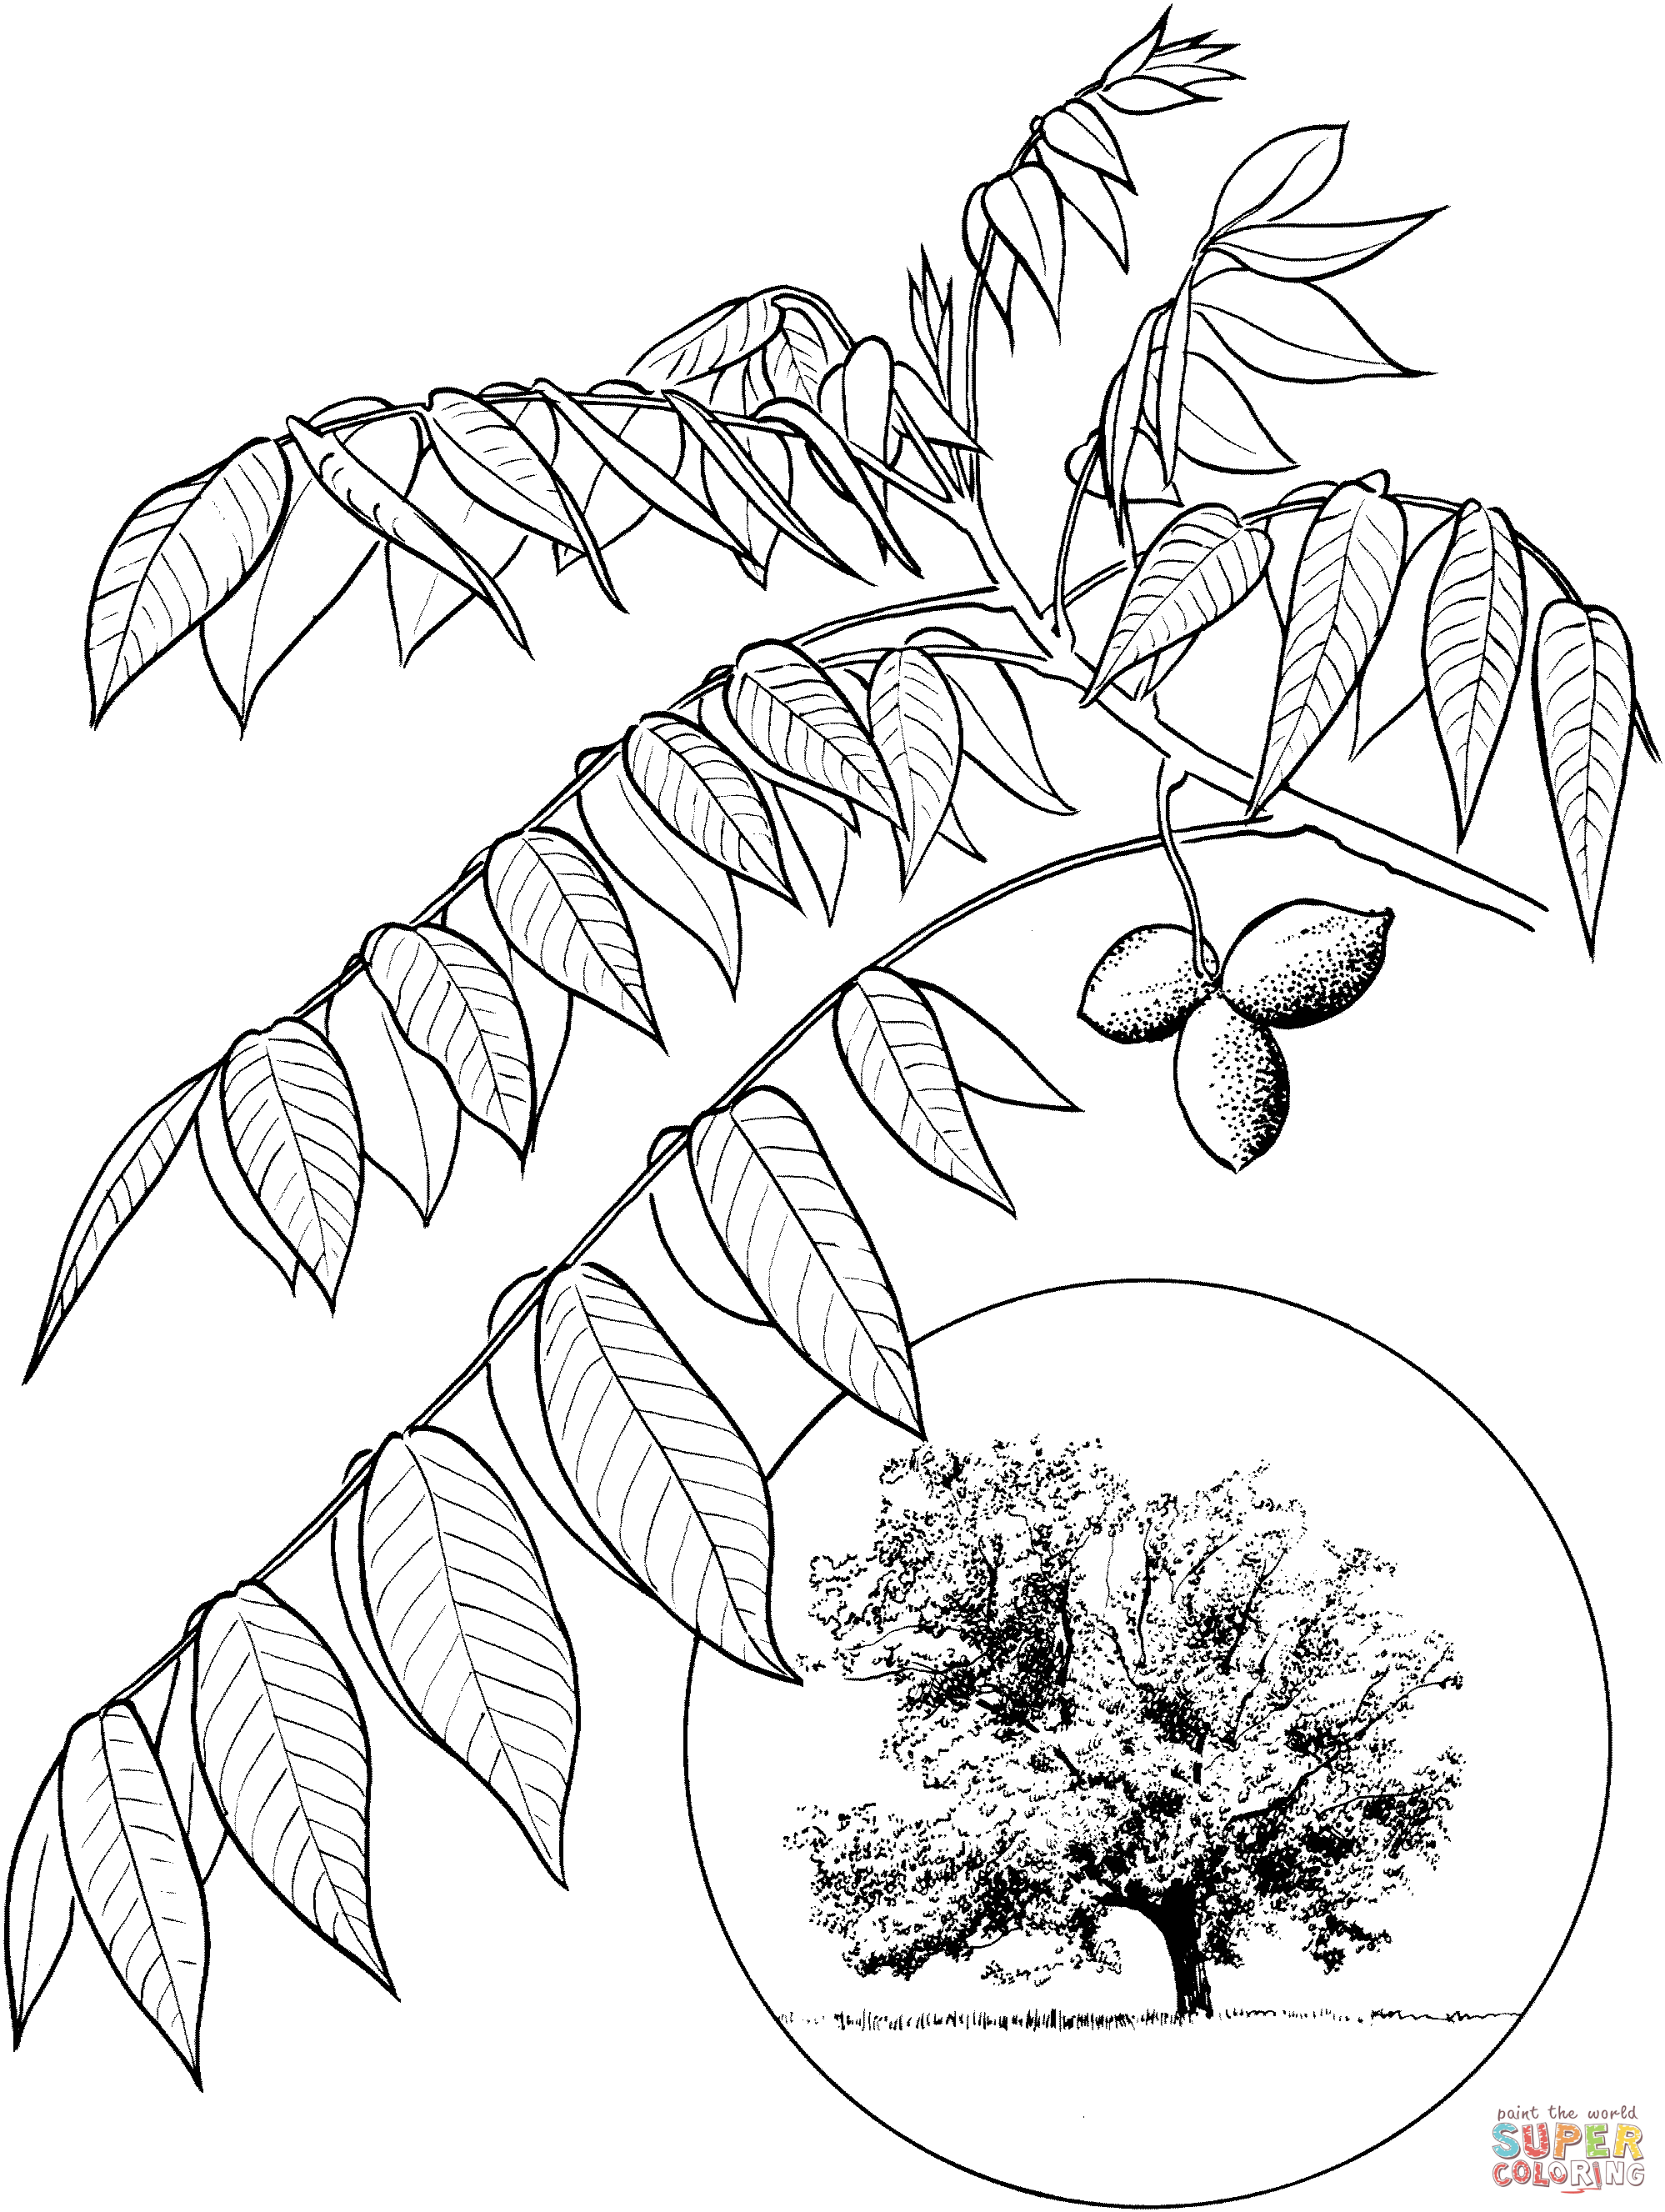 Walnut tree coloring pages.